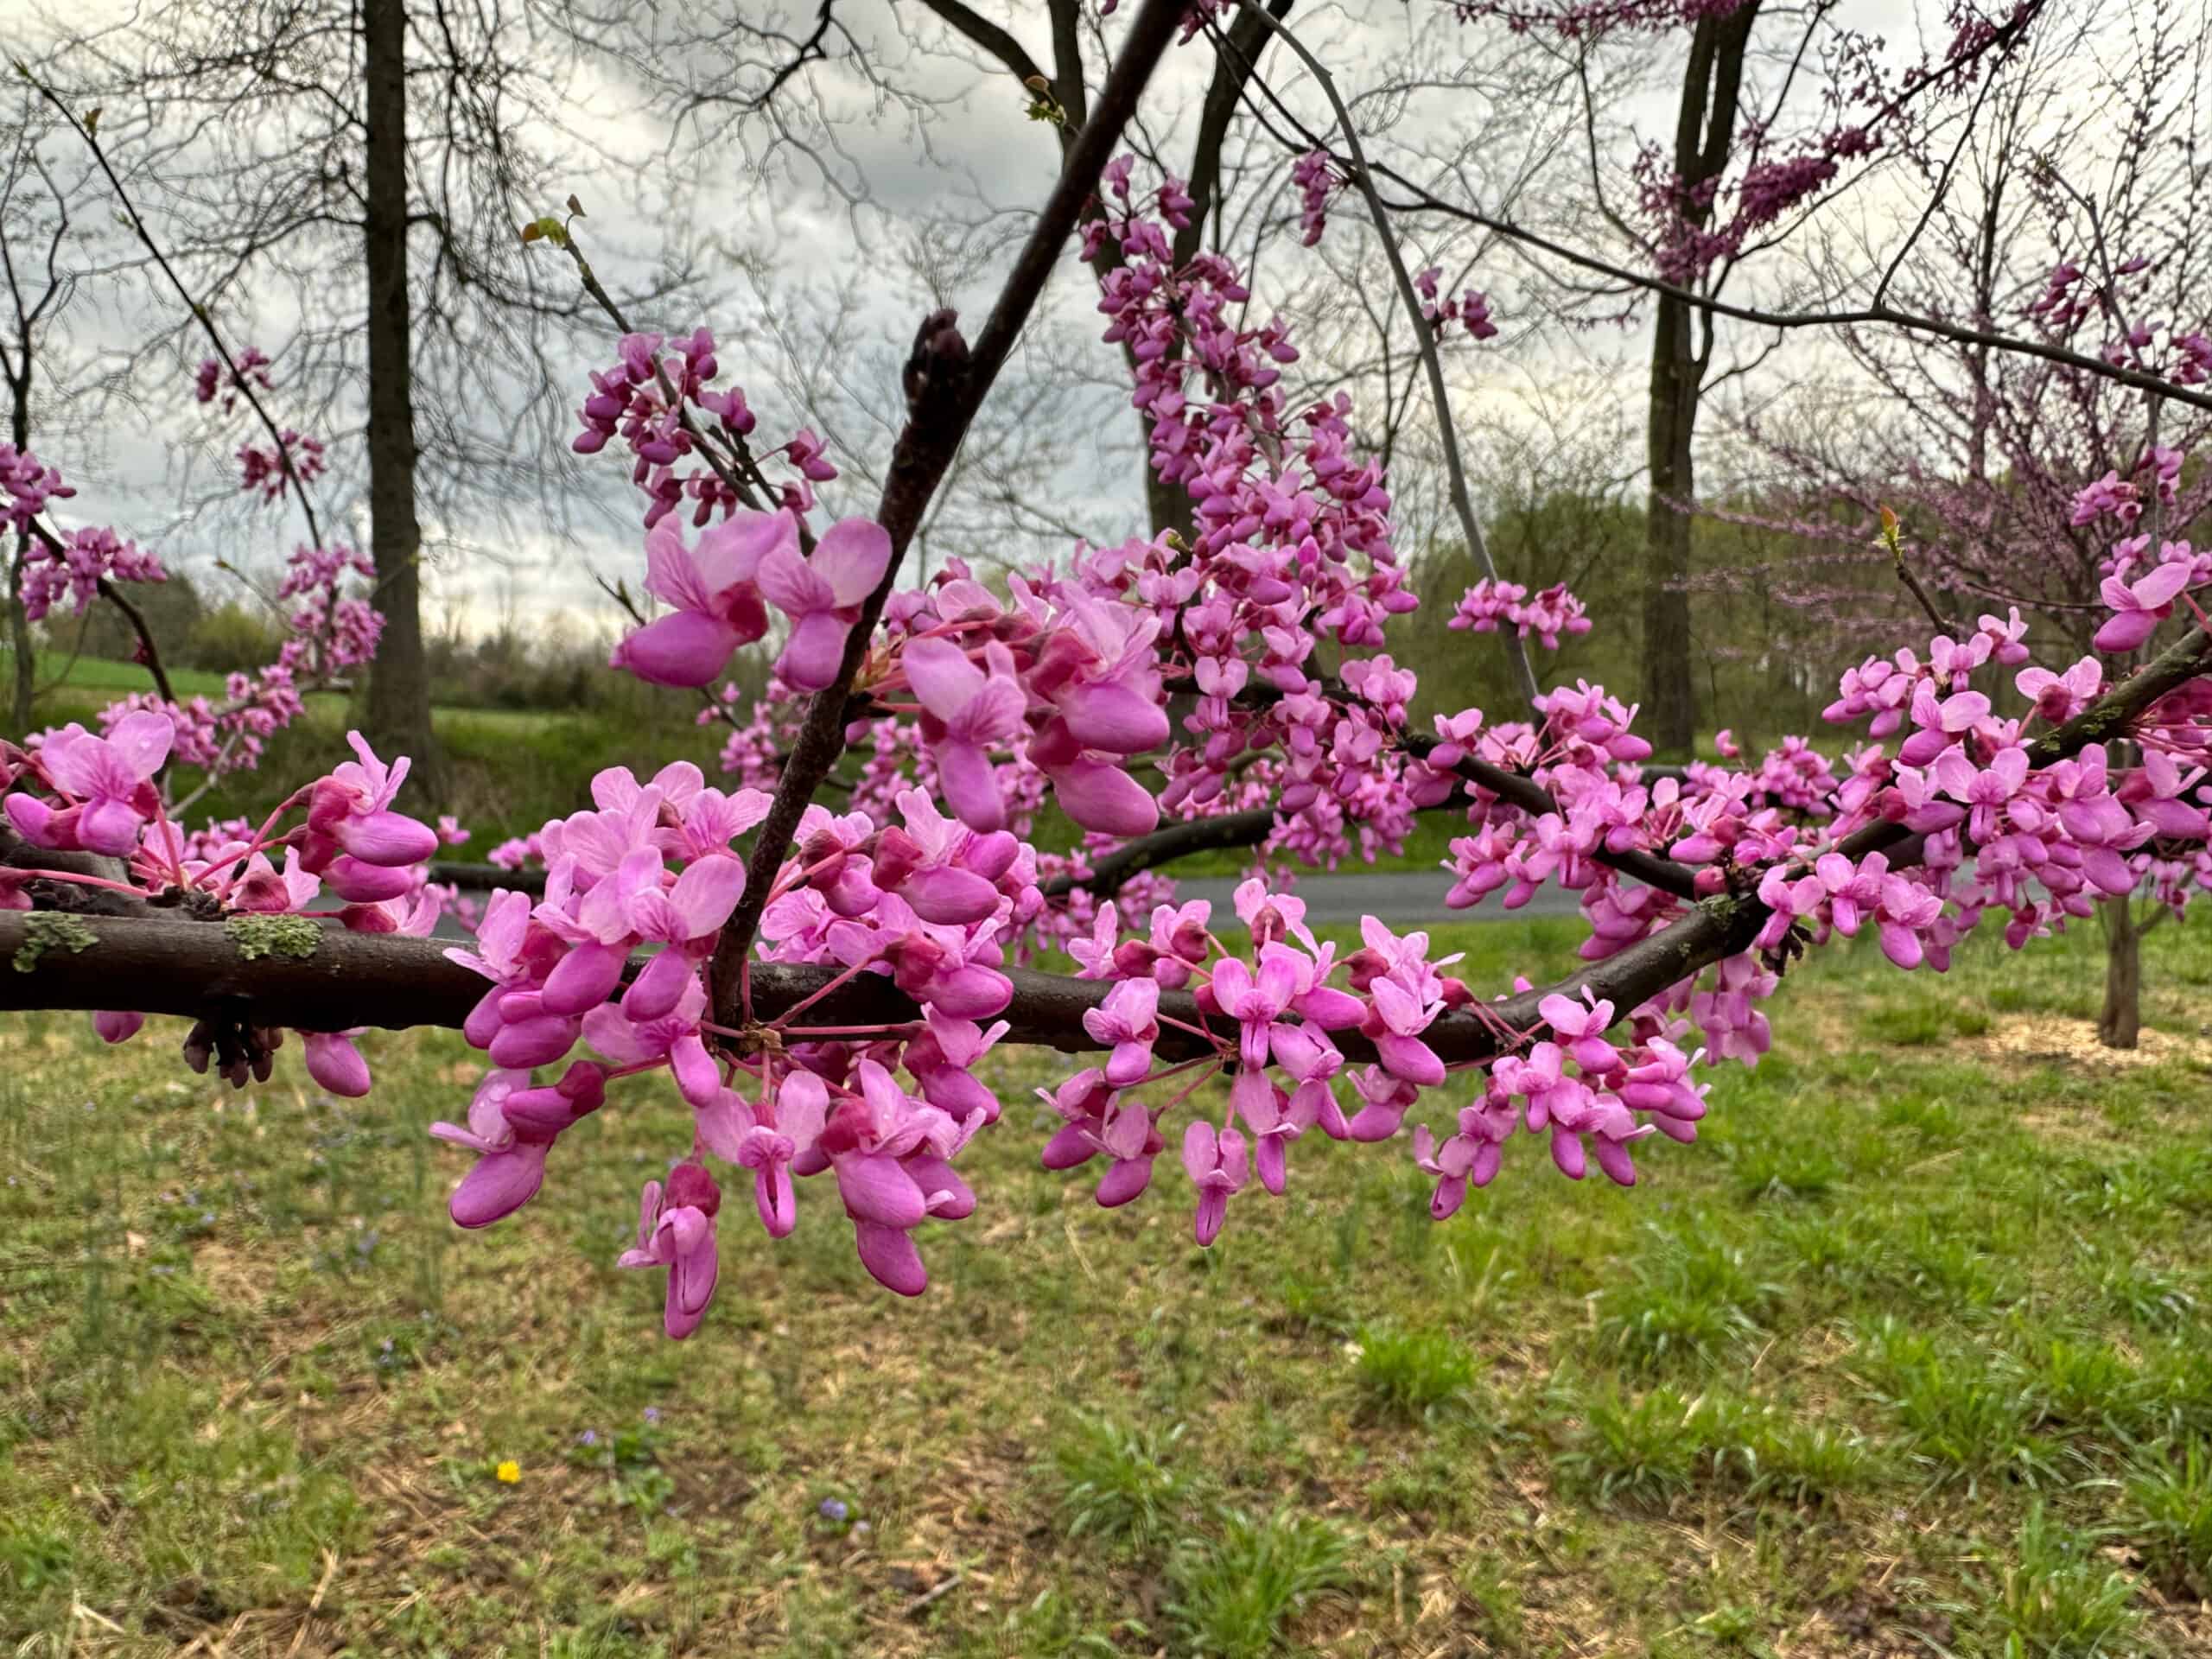 A hot pink branch of redbud flowers against a cloudy sky